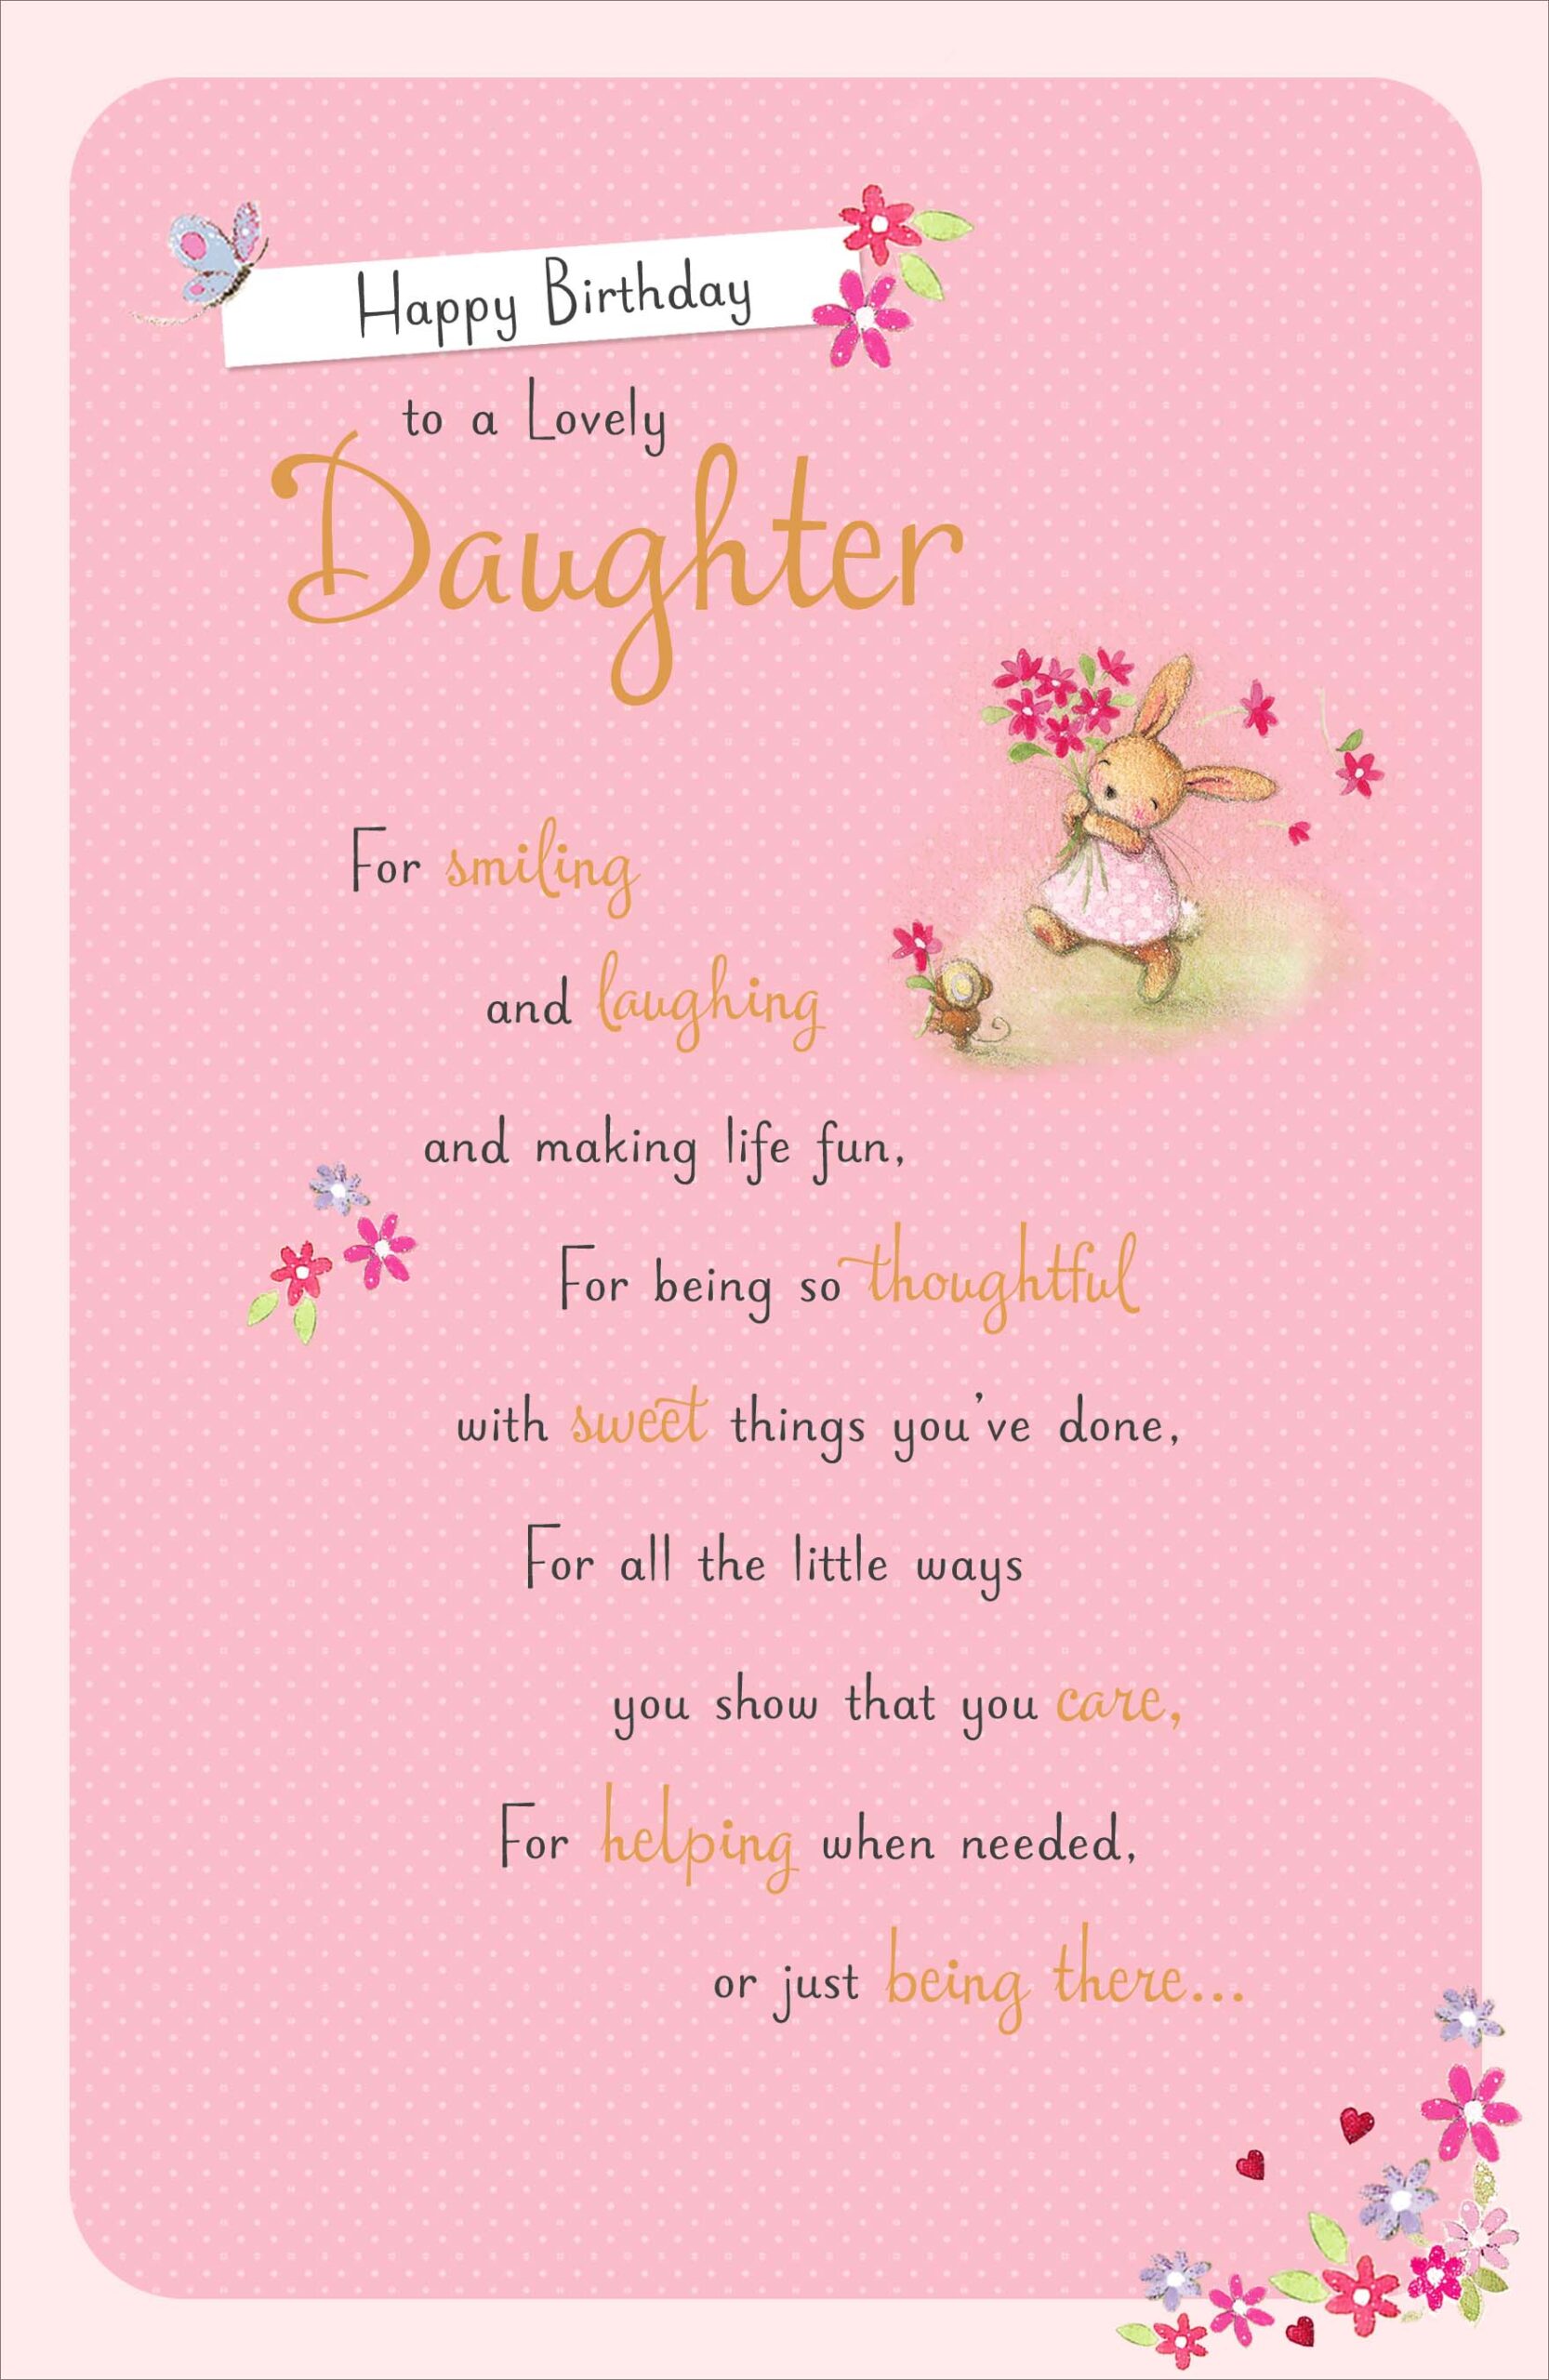 Daughter Birthday Poems For Her